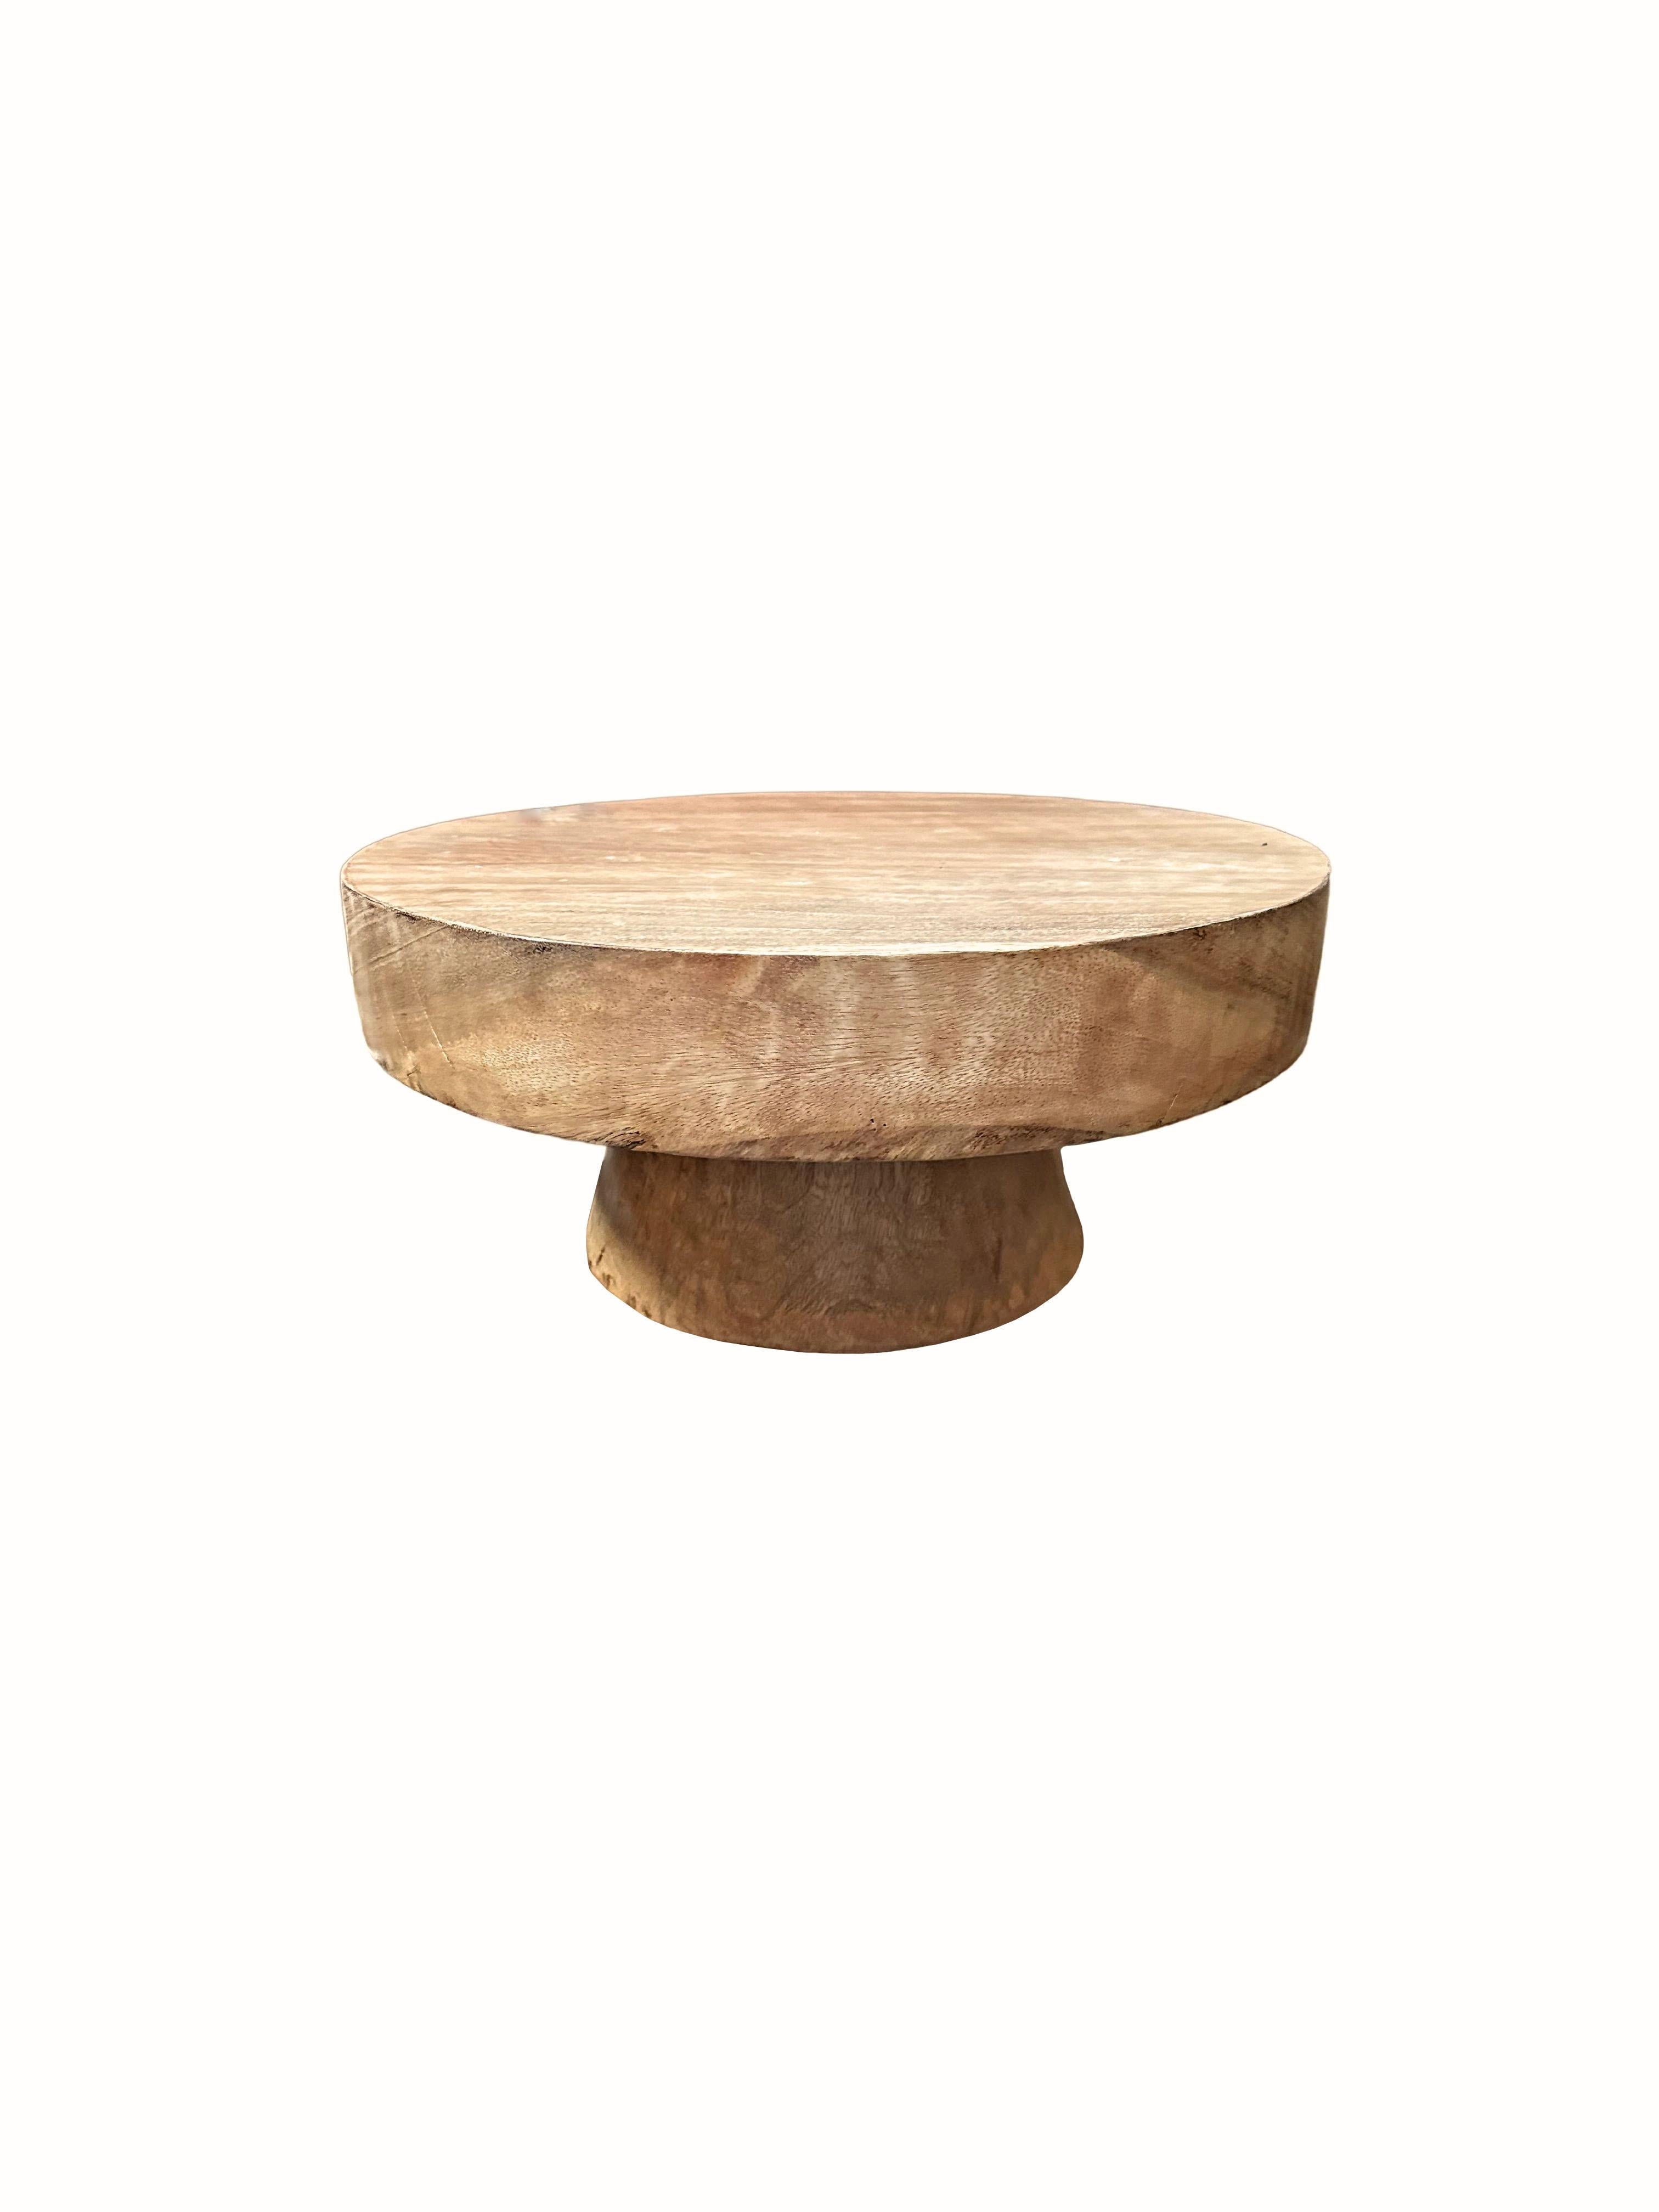 Hand-Crafted Sculptural Round Table Crafted from Solid Mango Wood, Natural Finish For Sale